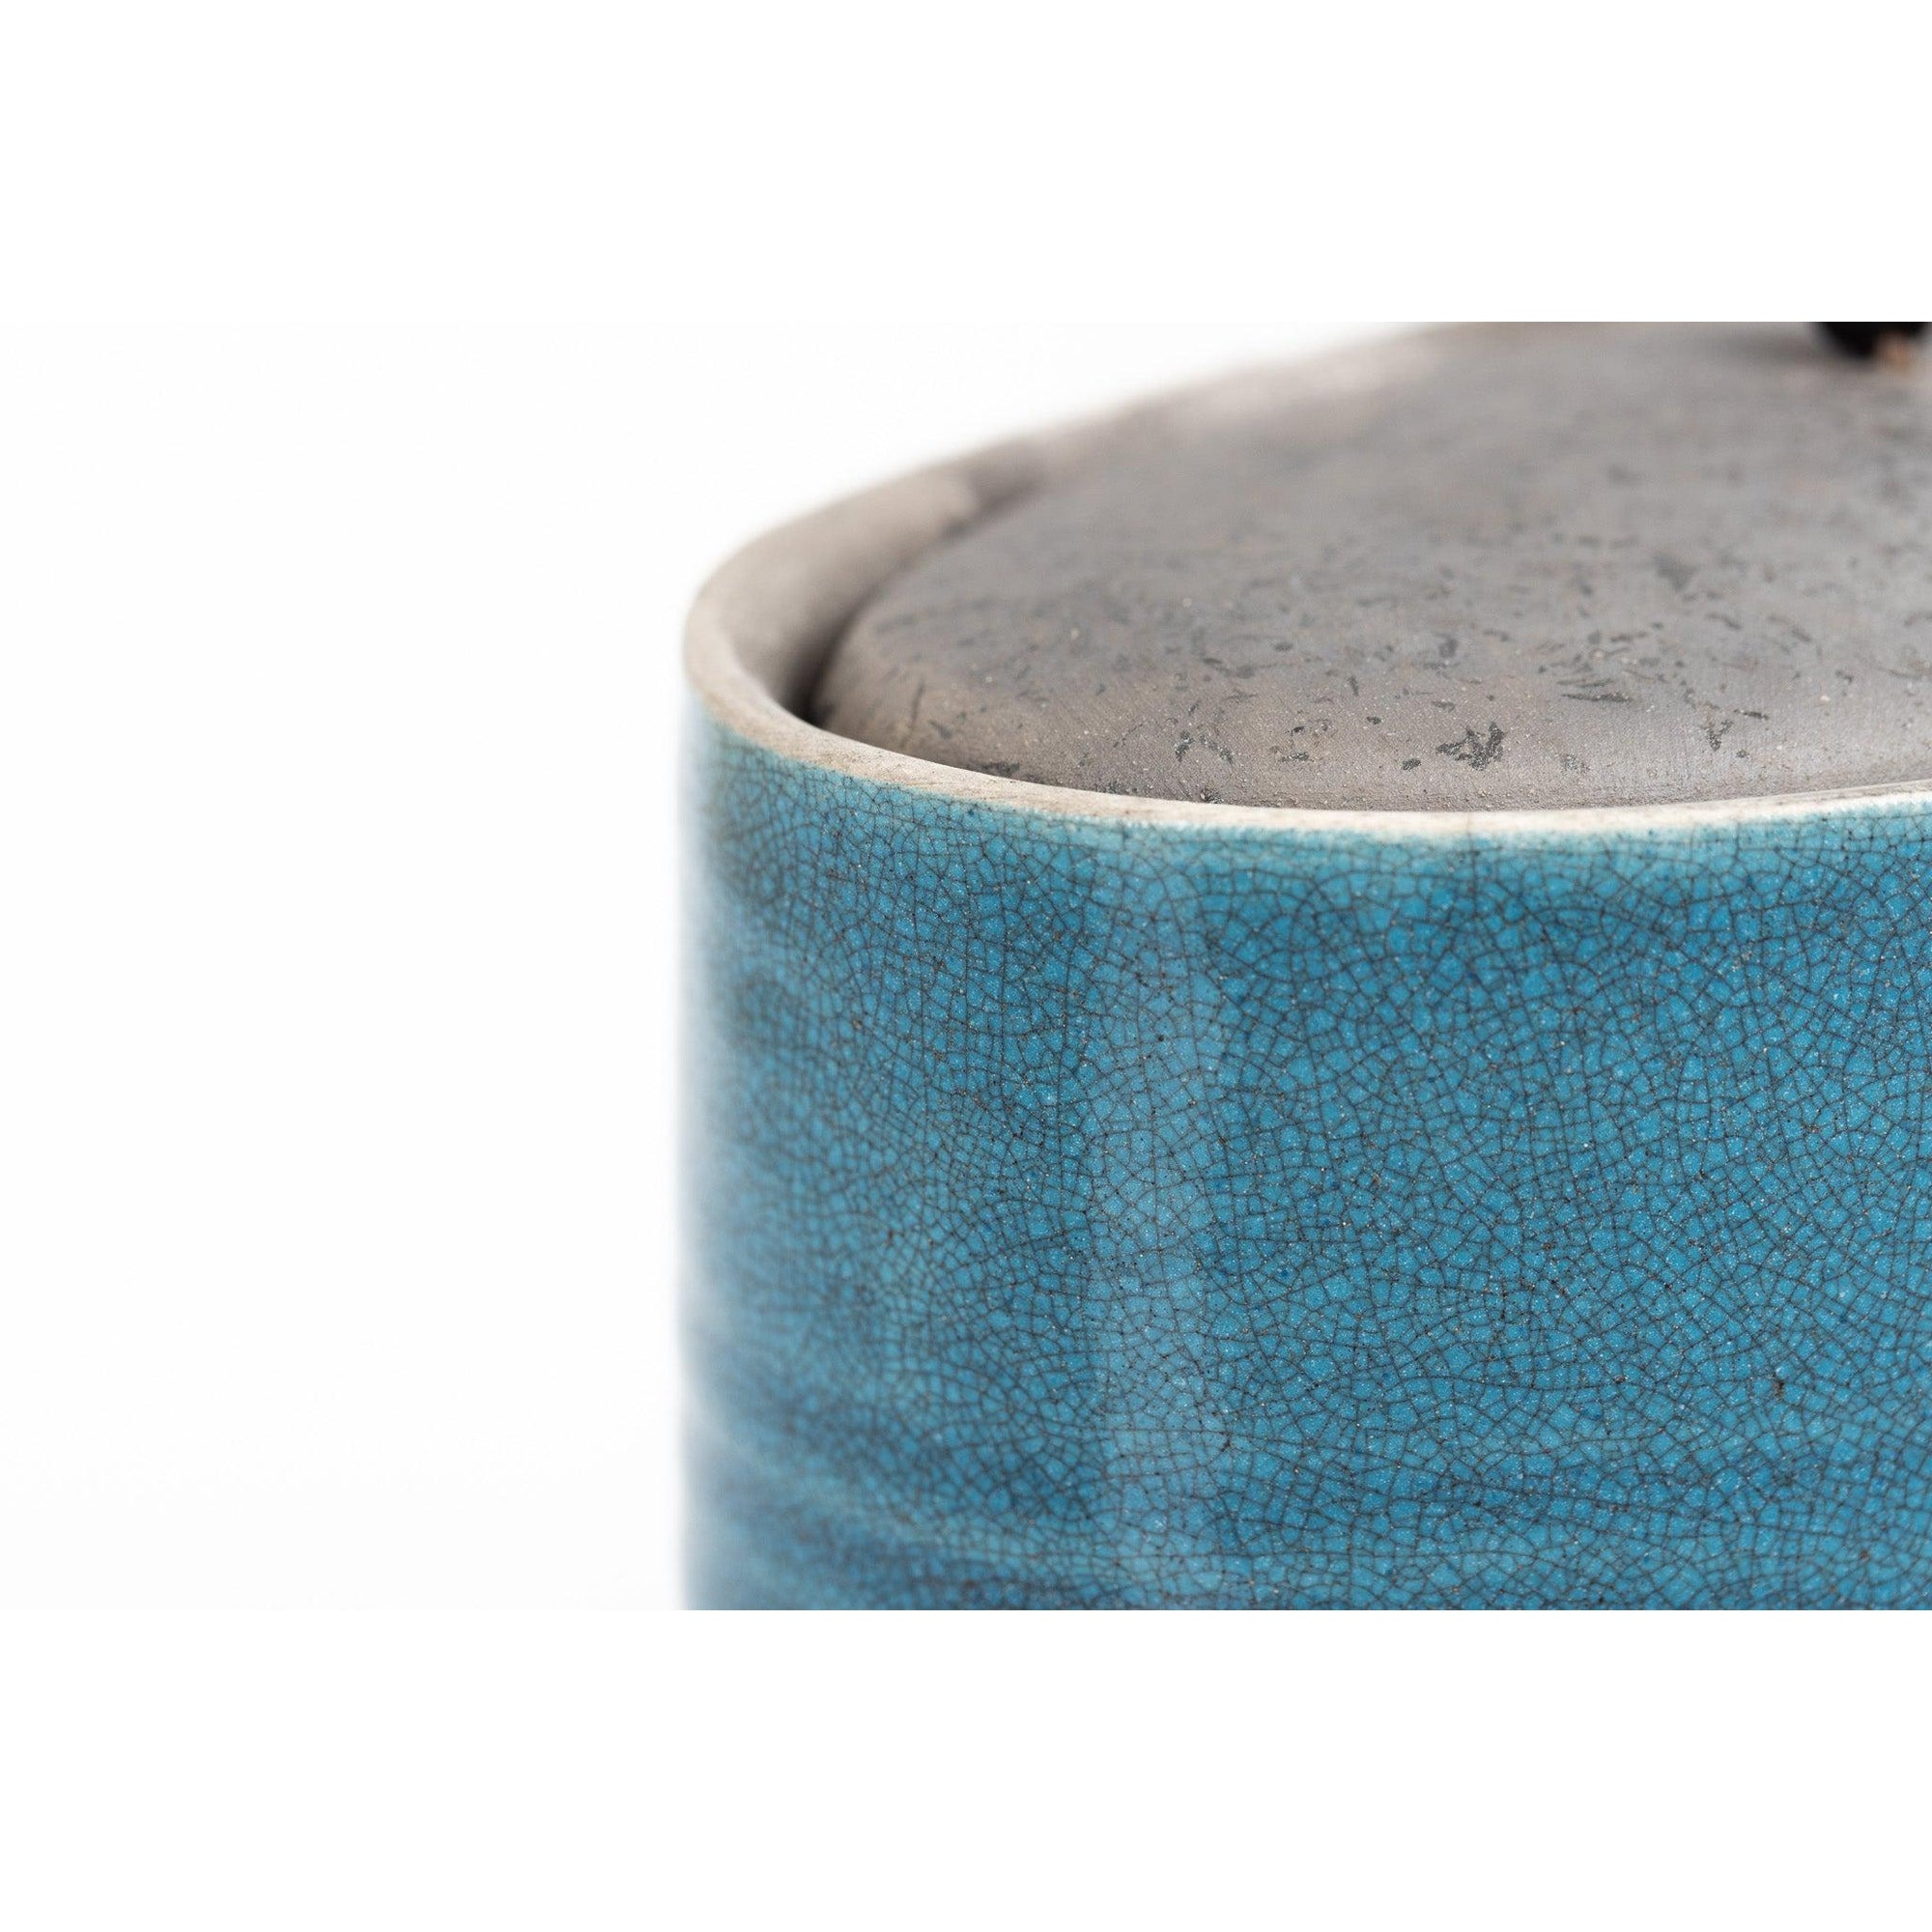 KSDD1 Ellipse, Raku Oval Container by Kate Schuricht, available at Padstow Gallery, Cornwall